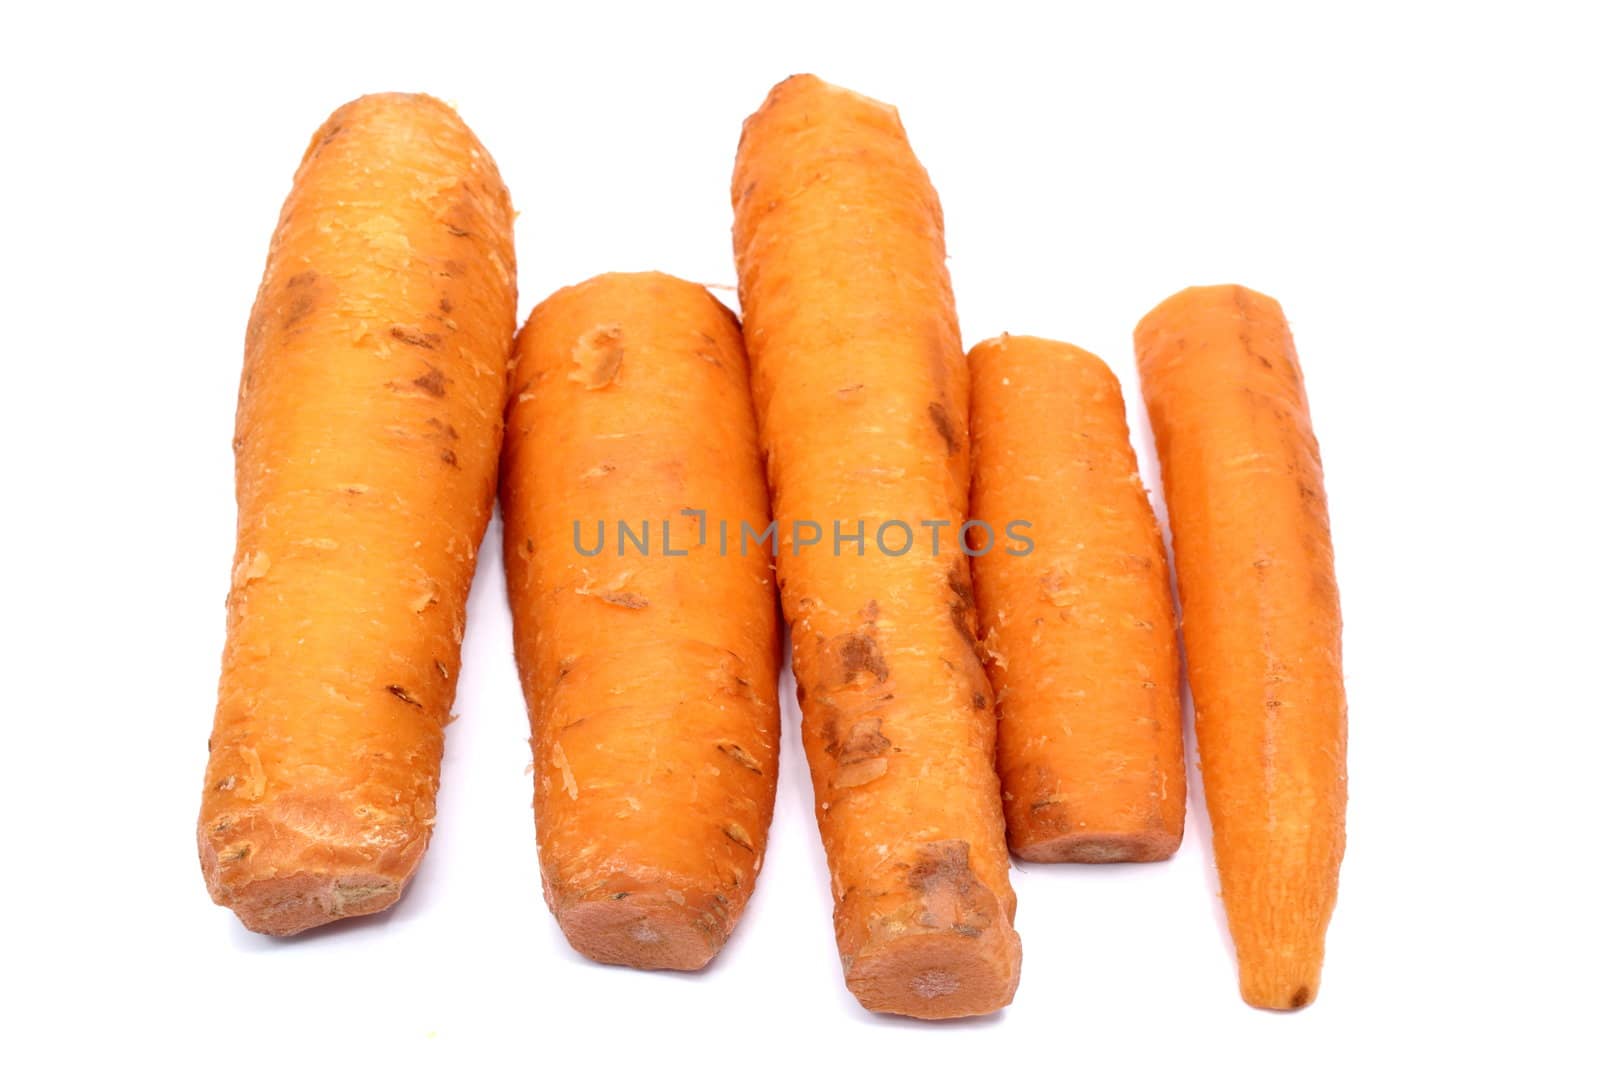 five boiled carrots by taviphoto